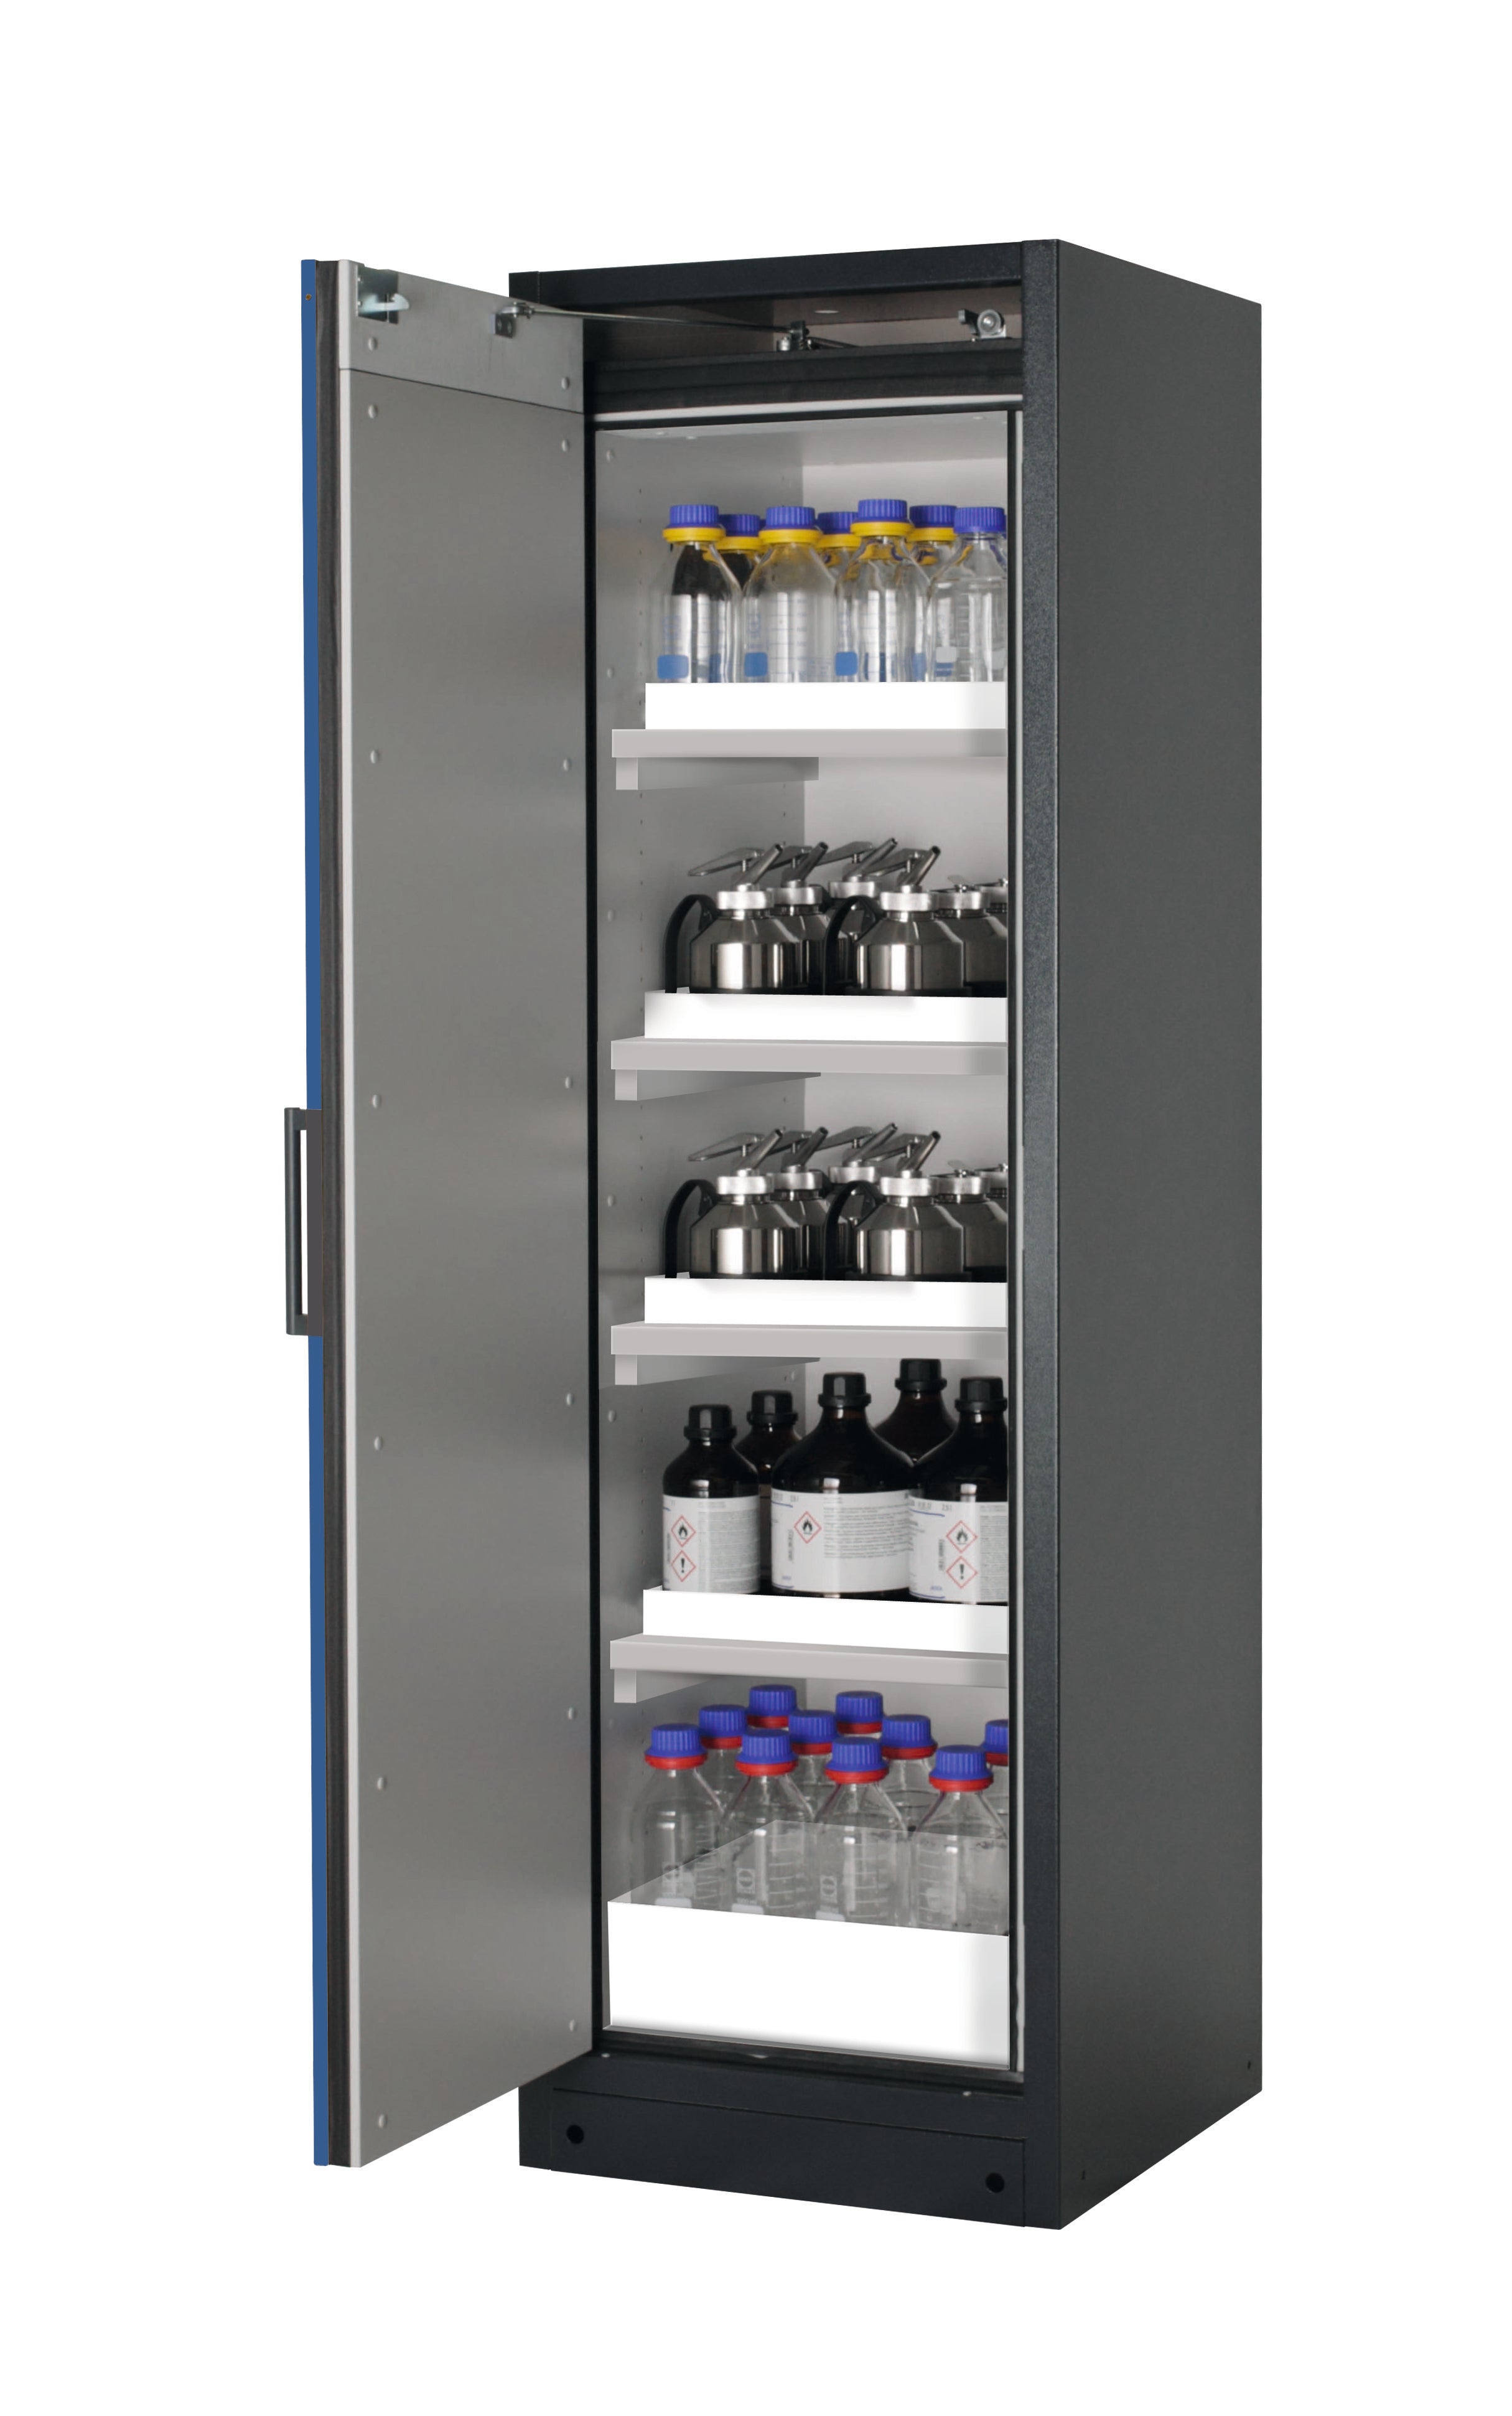 Type 90 safety storage cabinet Q-CLASSIC-90 model Q90.195.060 in gentian blue RAL 5010 with 4x tray shelf (standard) (polypropylene),